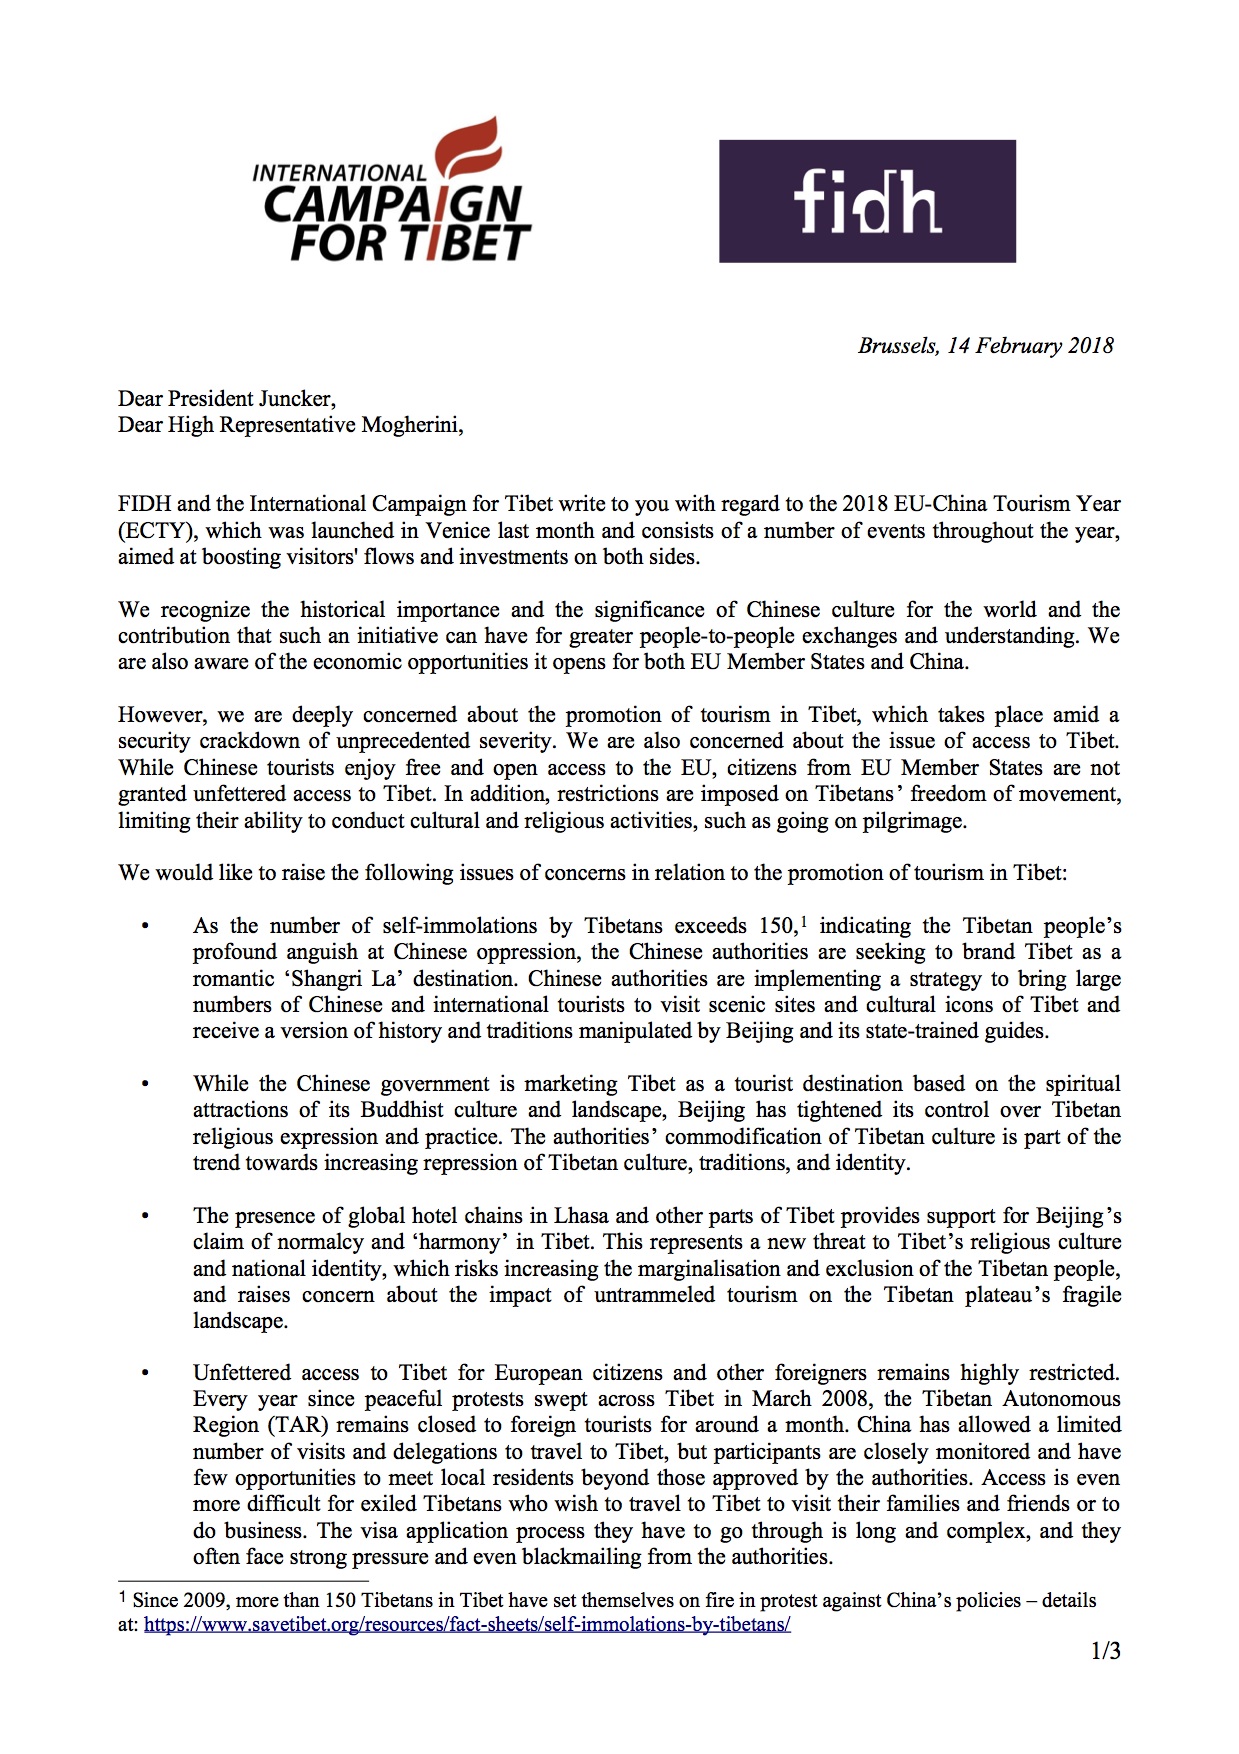 ICT and FIDH Joint letter Tourism Year - FINAL 2